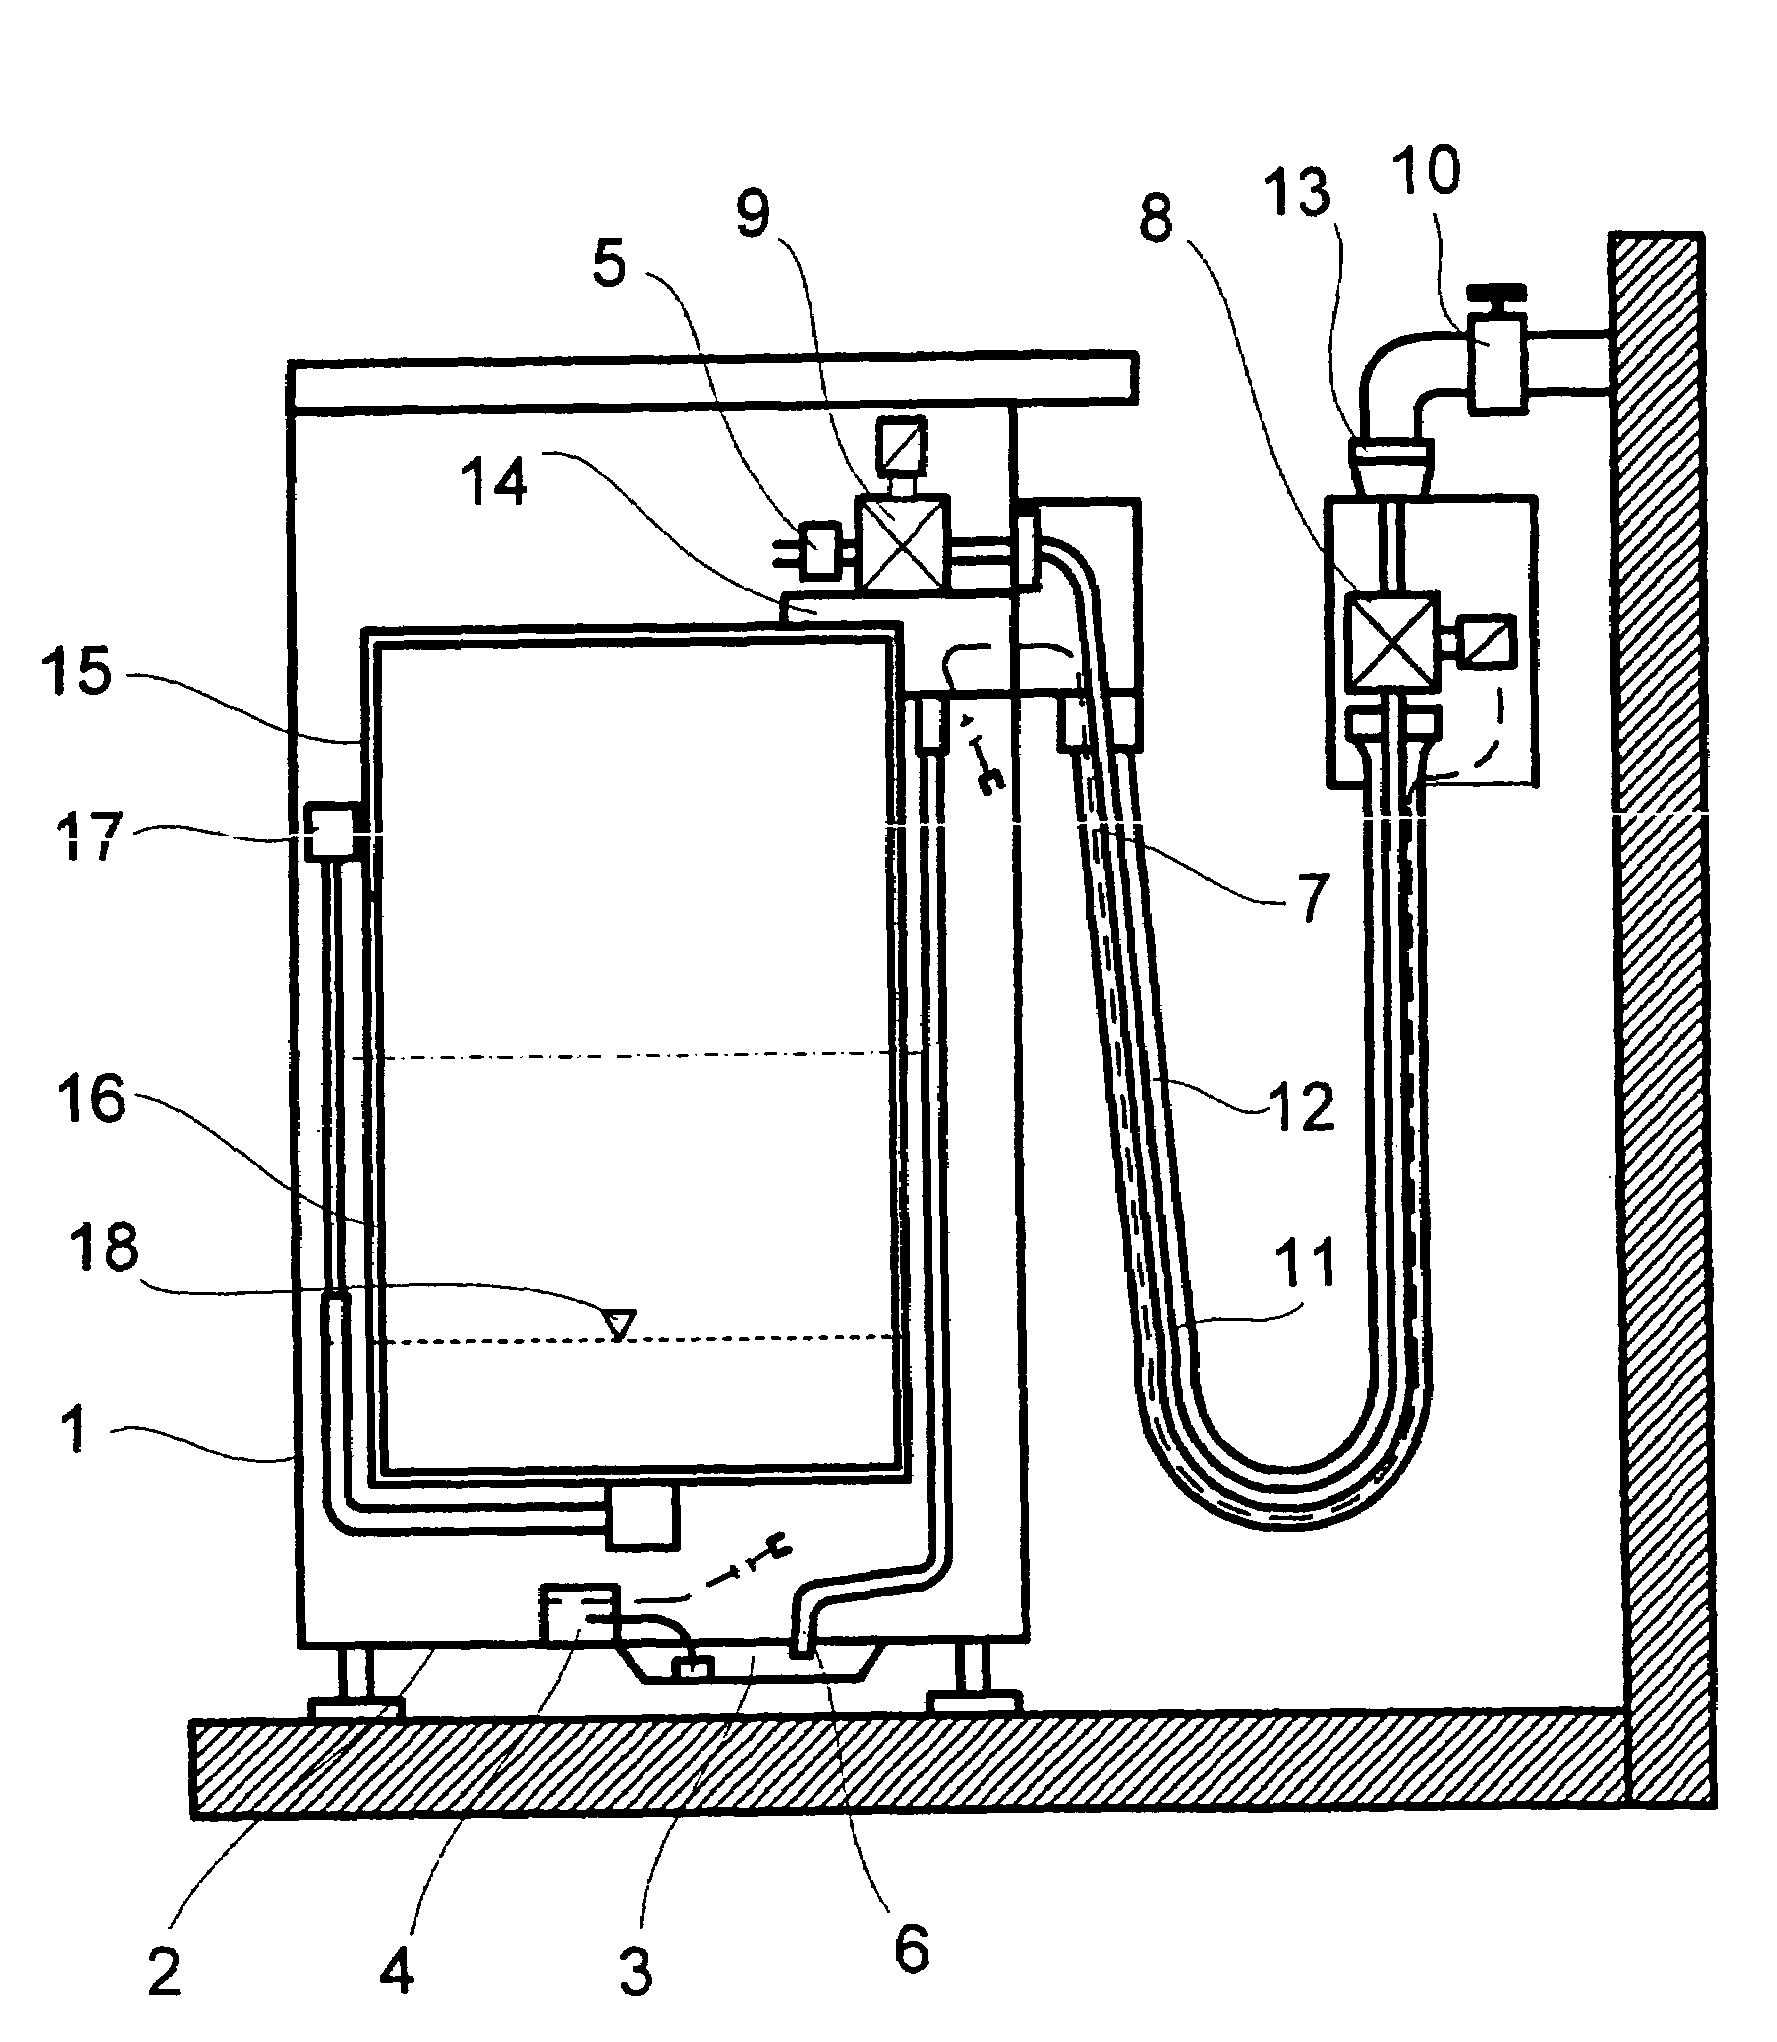 Method for checking valves in a program-controlled water-carrying household appliance